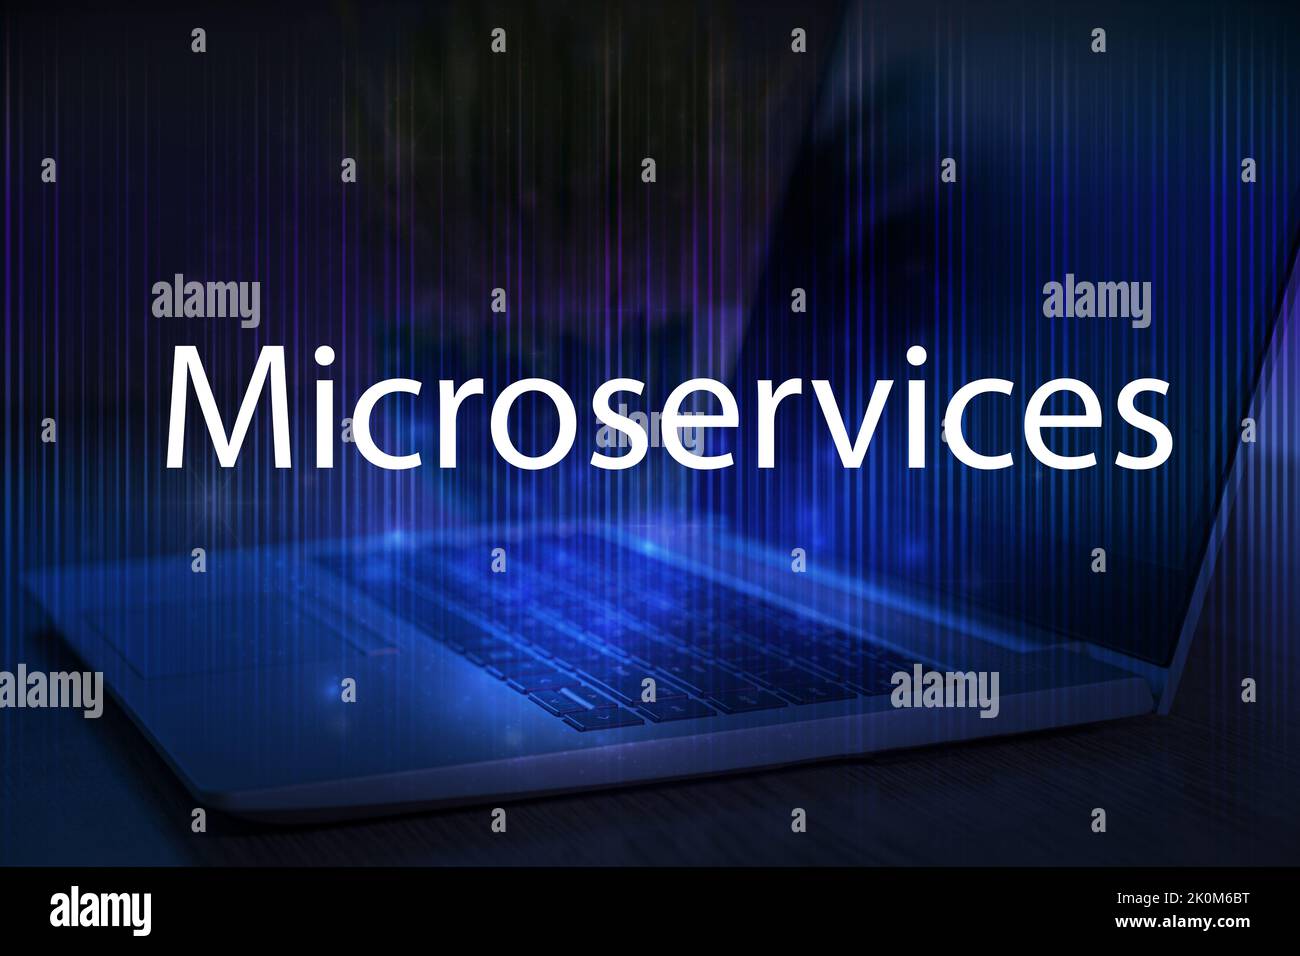 Microservices text on blue technology background with laptop. Stock Photo